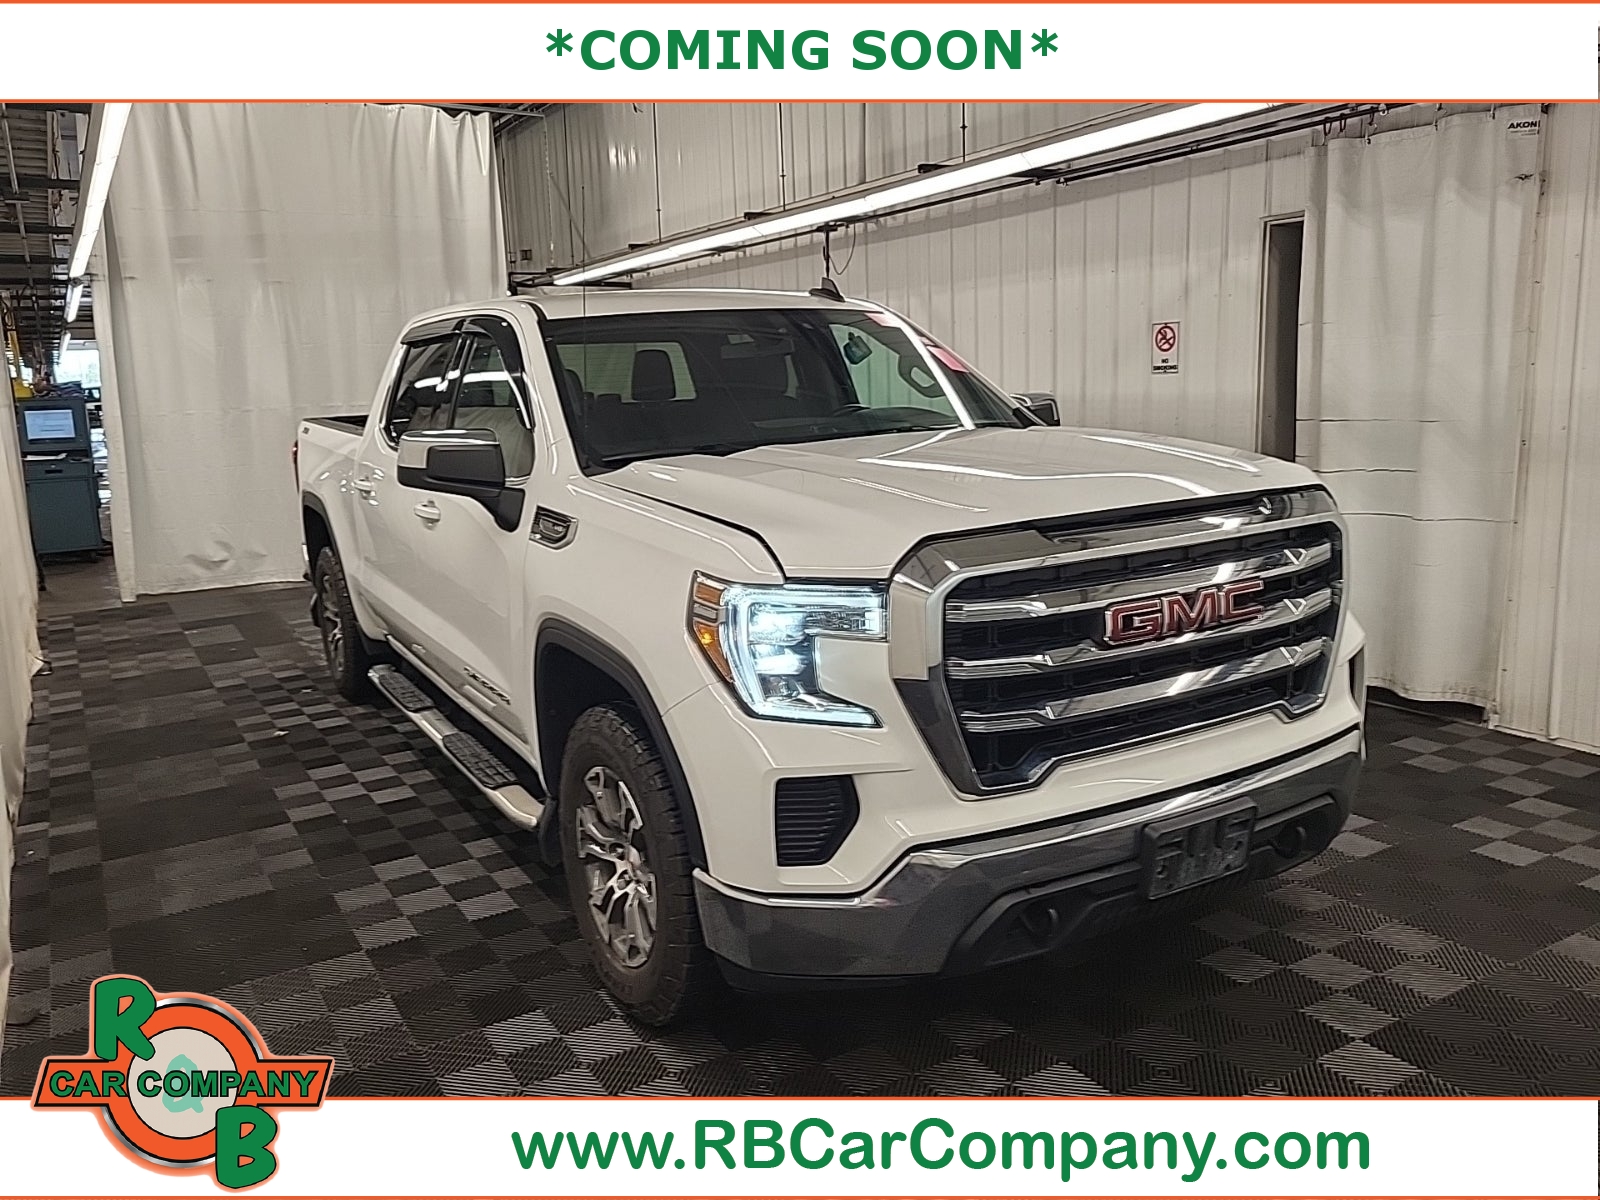 2022 GMC Sierra 1500 Limited AT4, 36310, Photo 1